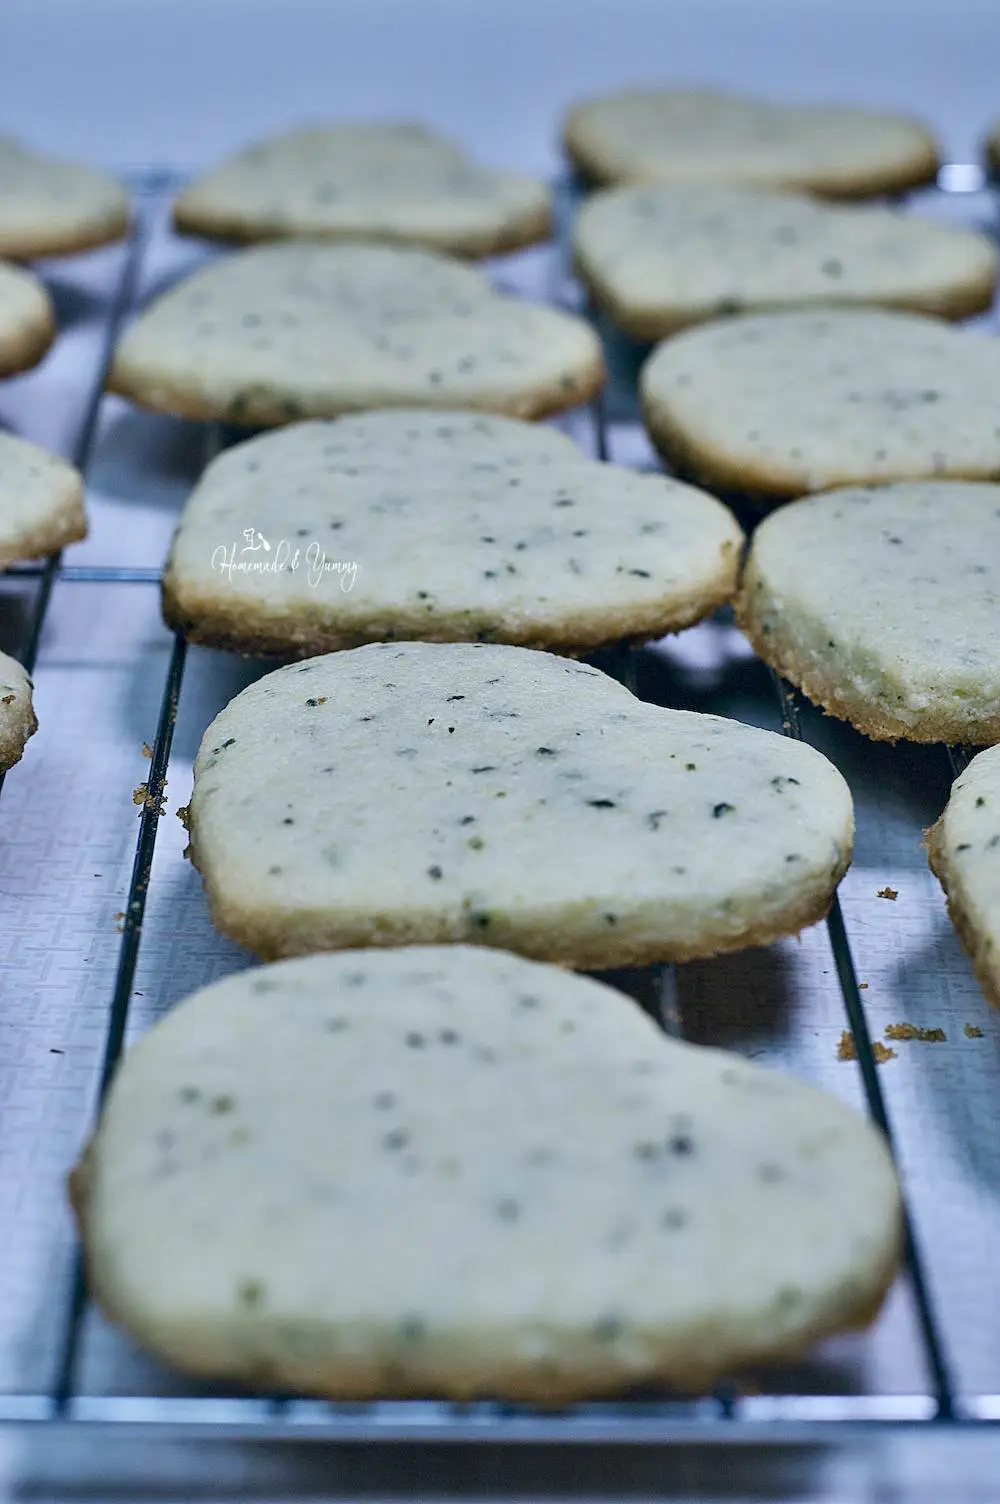 Fresh baked heart shaped cookies with hemp seeds cooling on a rack